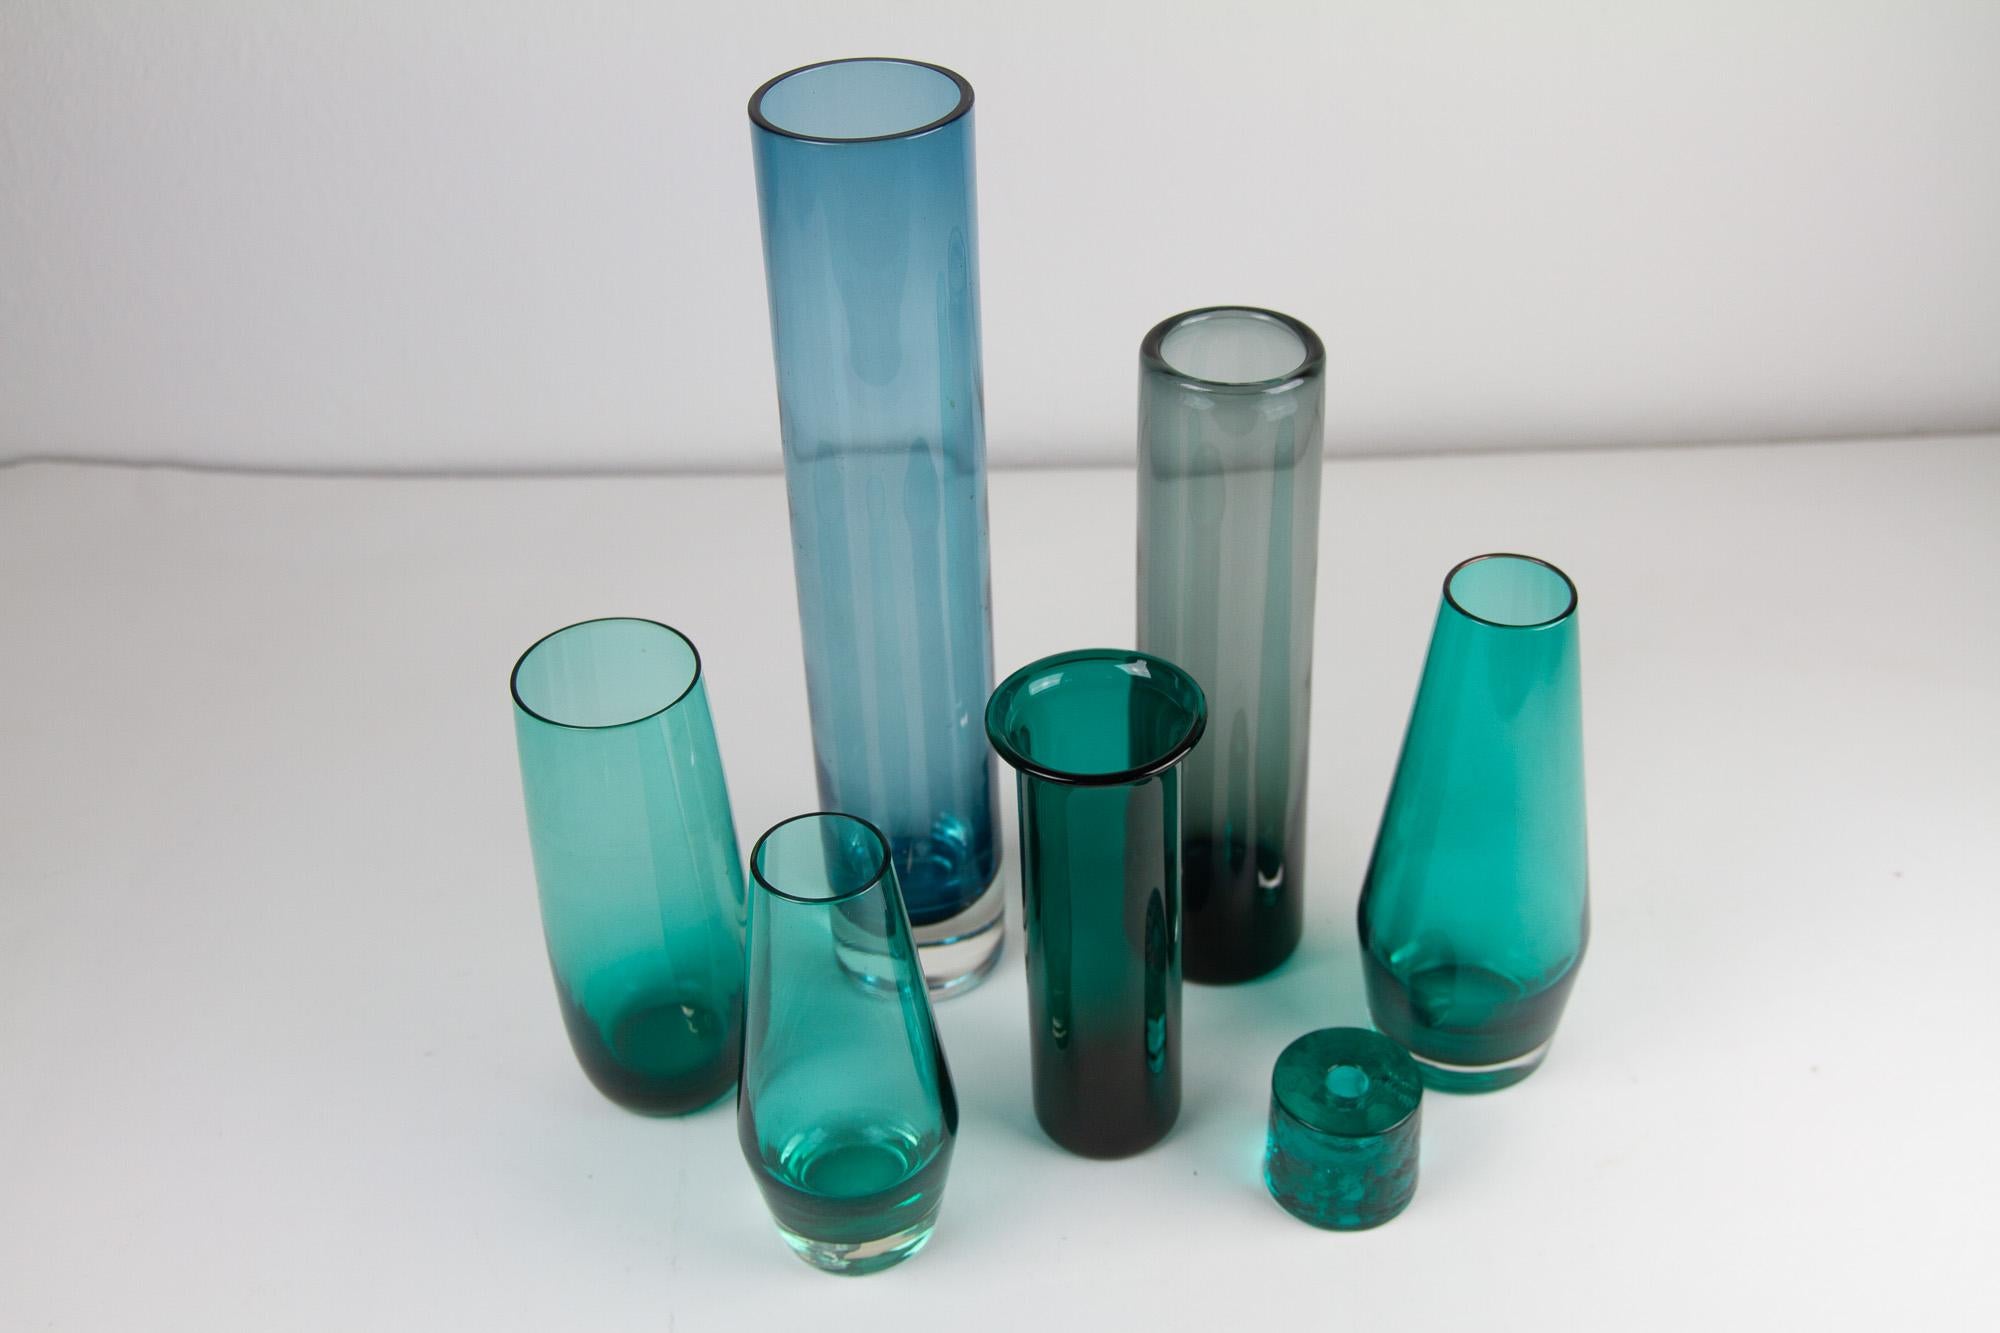 Vintage Scandinavian Modern green glass vases, 1960s. Set of 7.
Beautiful set of Scandinavian hand blown glass vases in different shades of green.
This collection consists of:

1 Tall cylindrical vase in clear and teal. Measures: Height 31.5